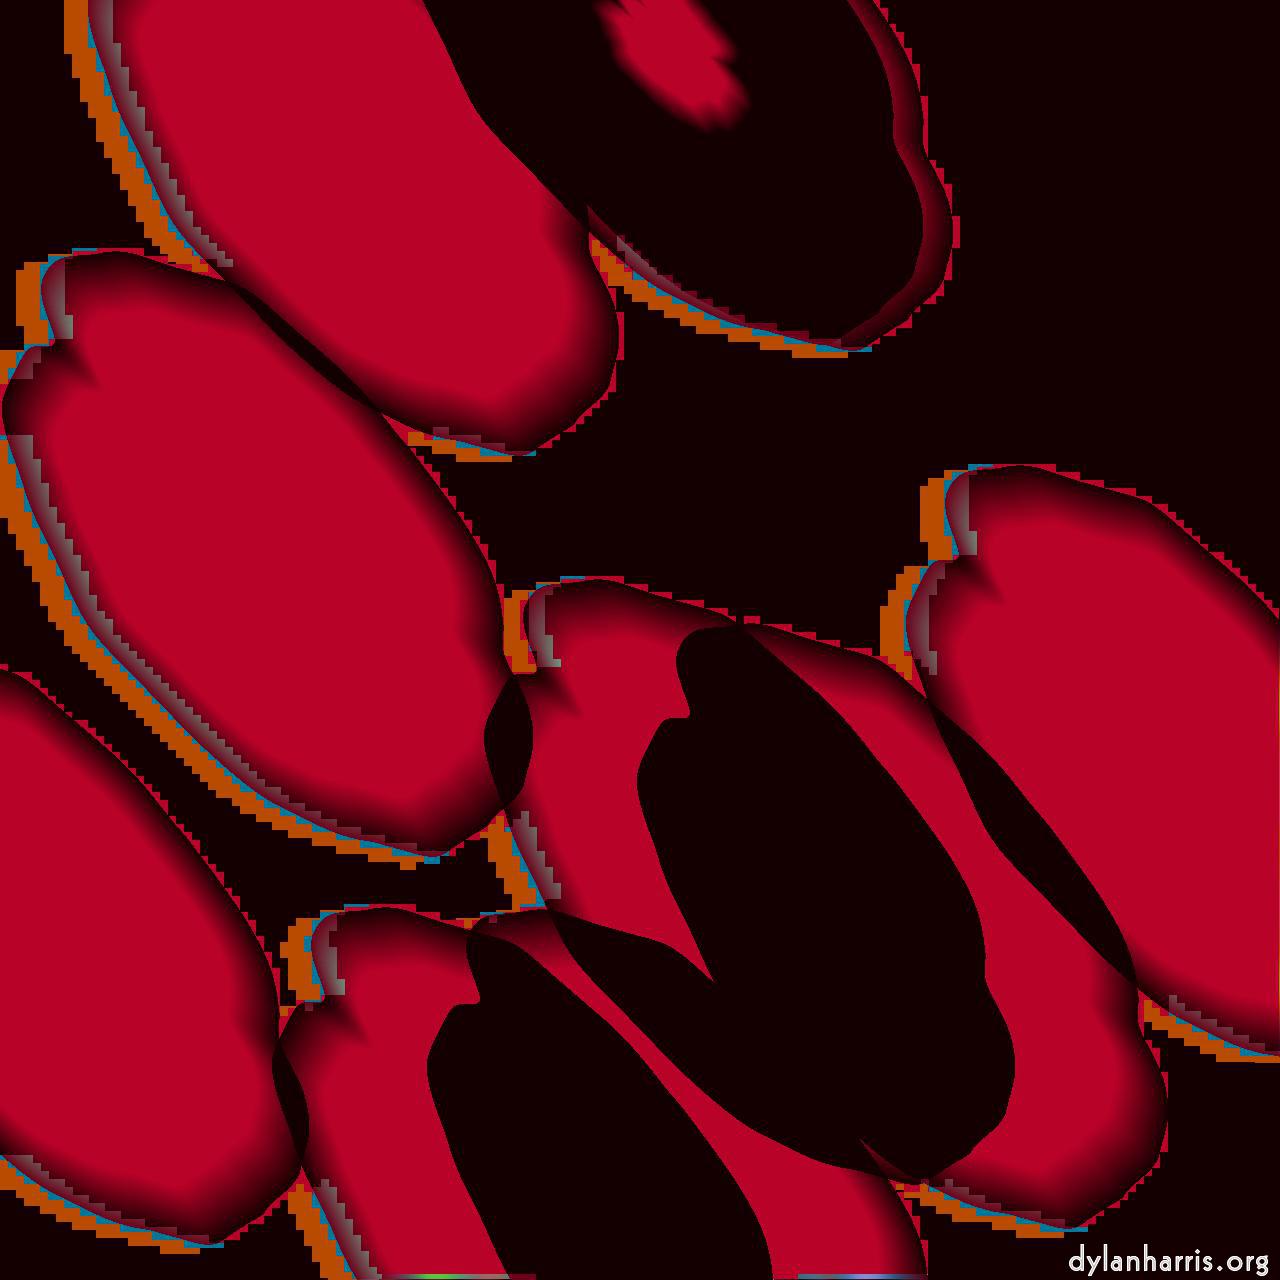 variations 1 :: red lumps